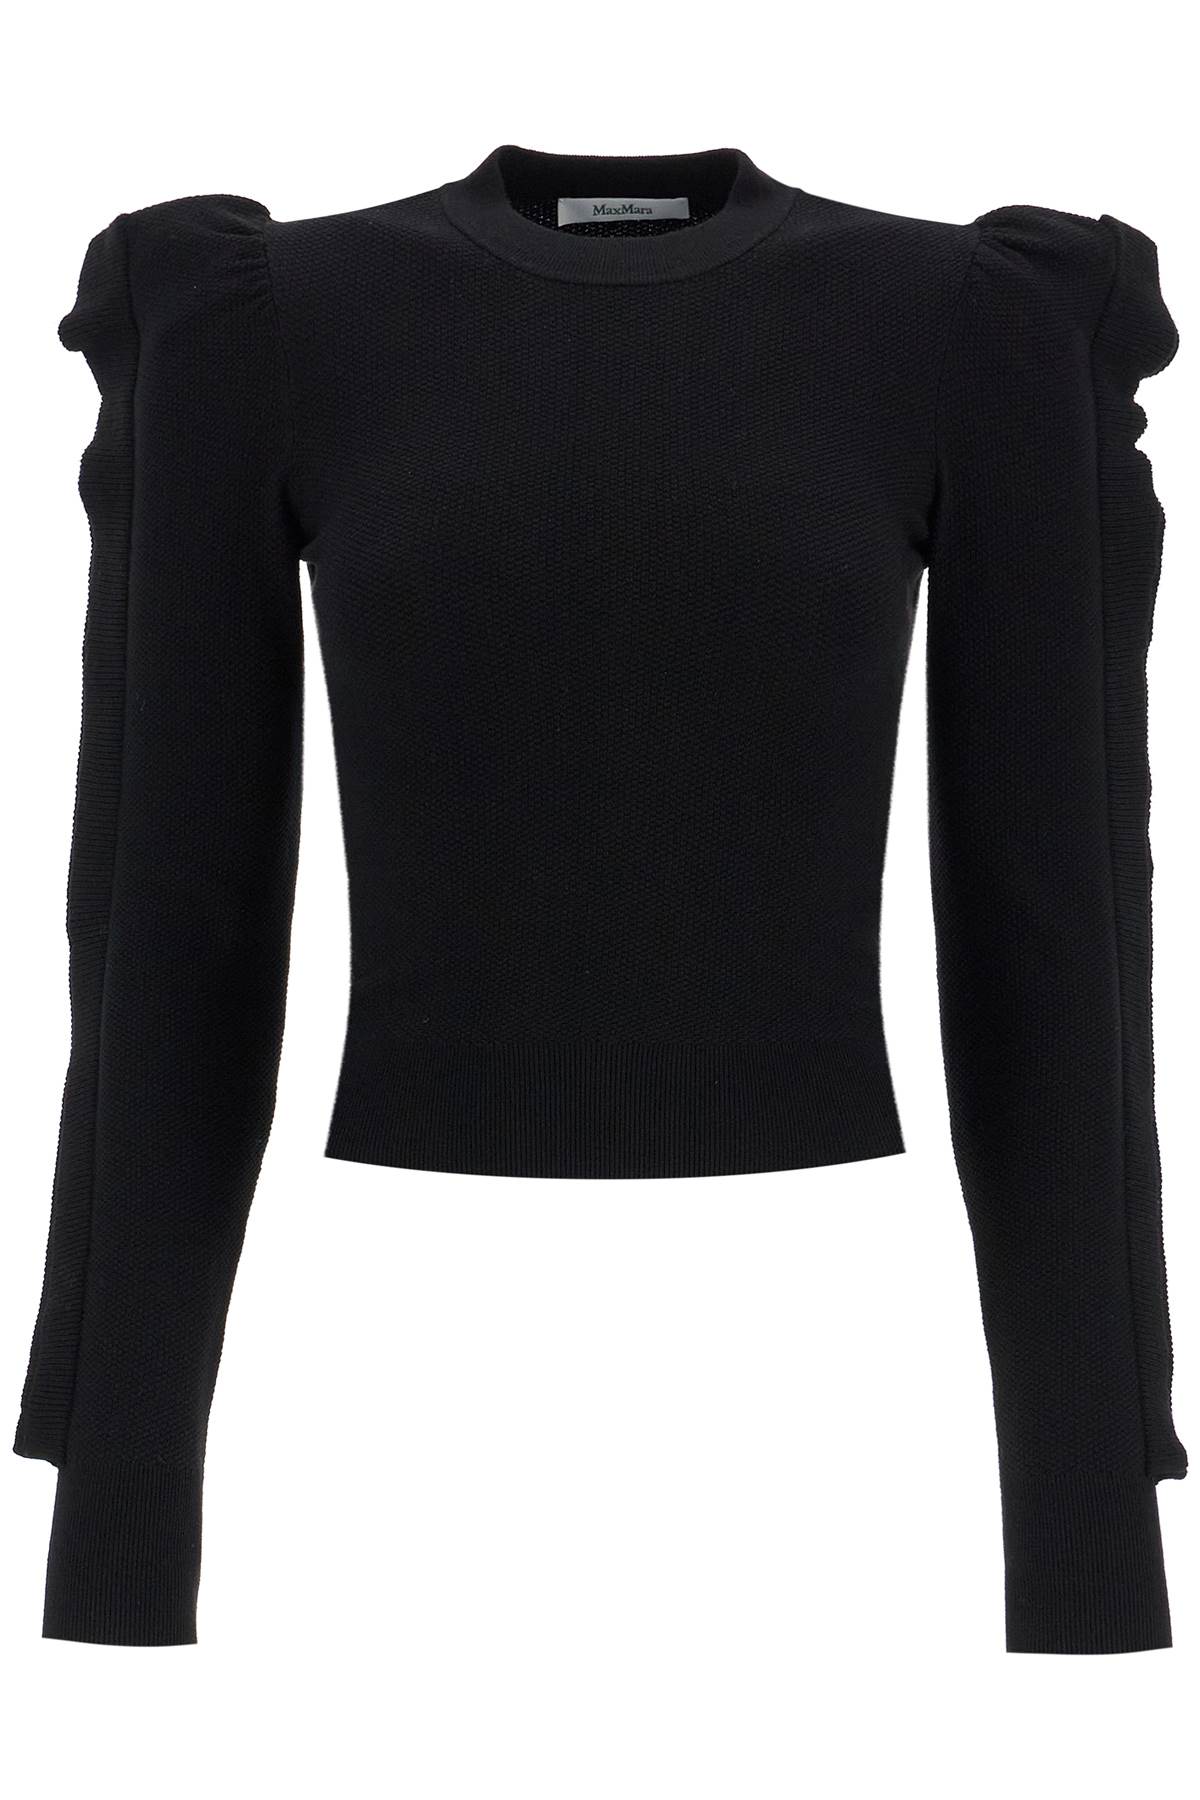 Max Mara Stretch Pullover With Ruffle In Black